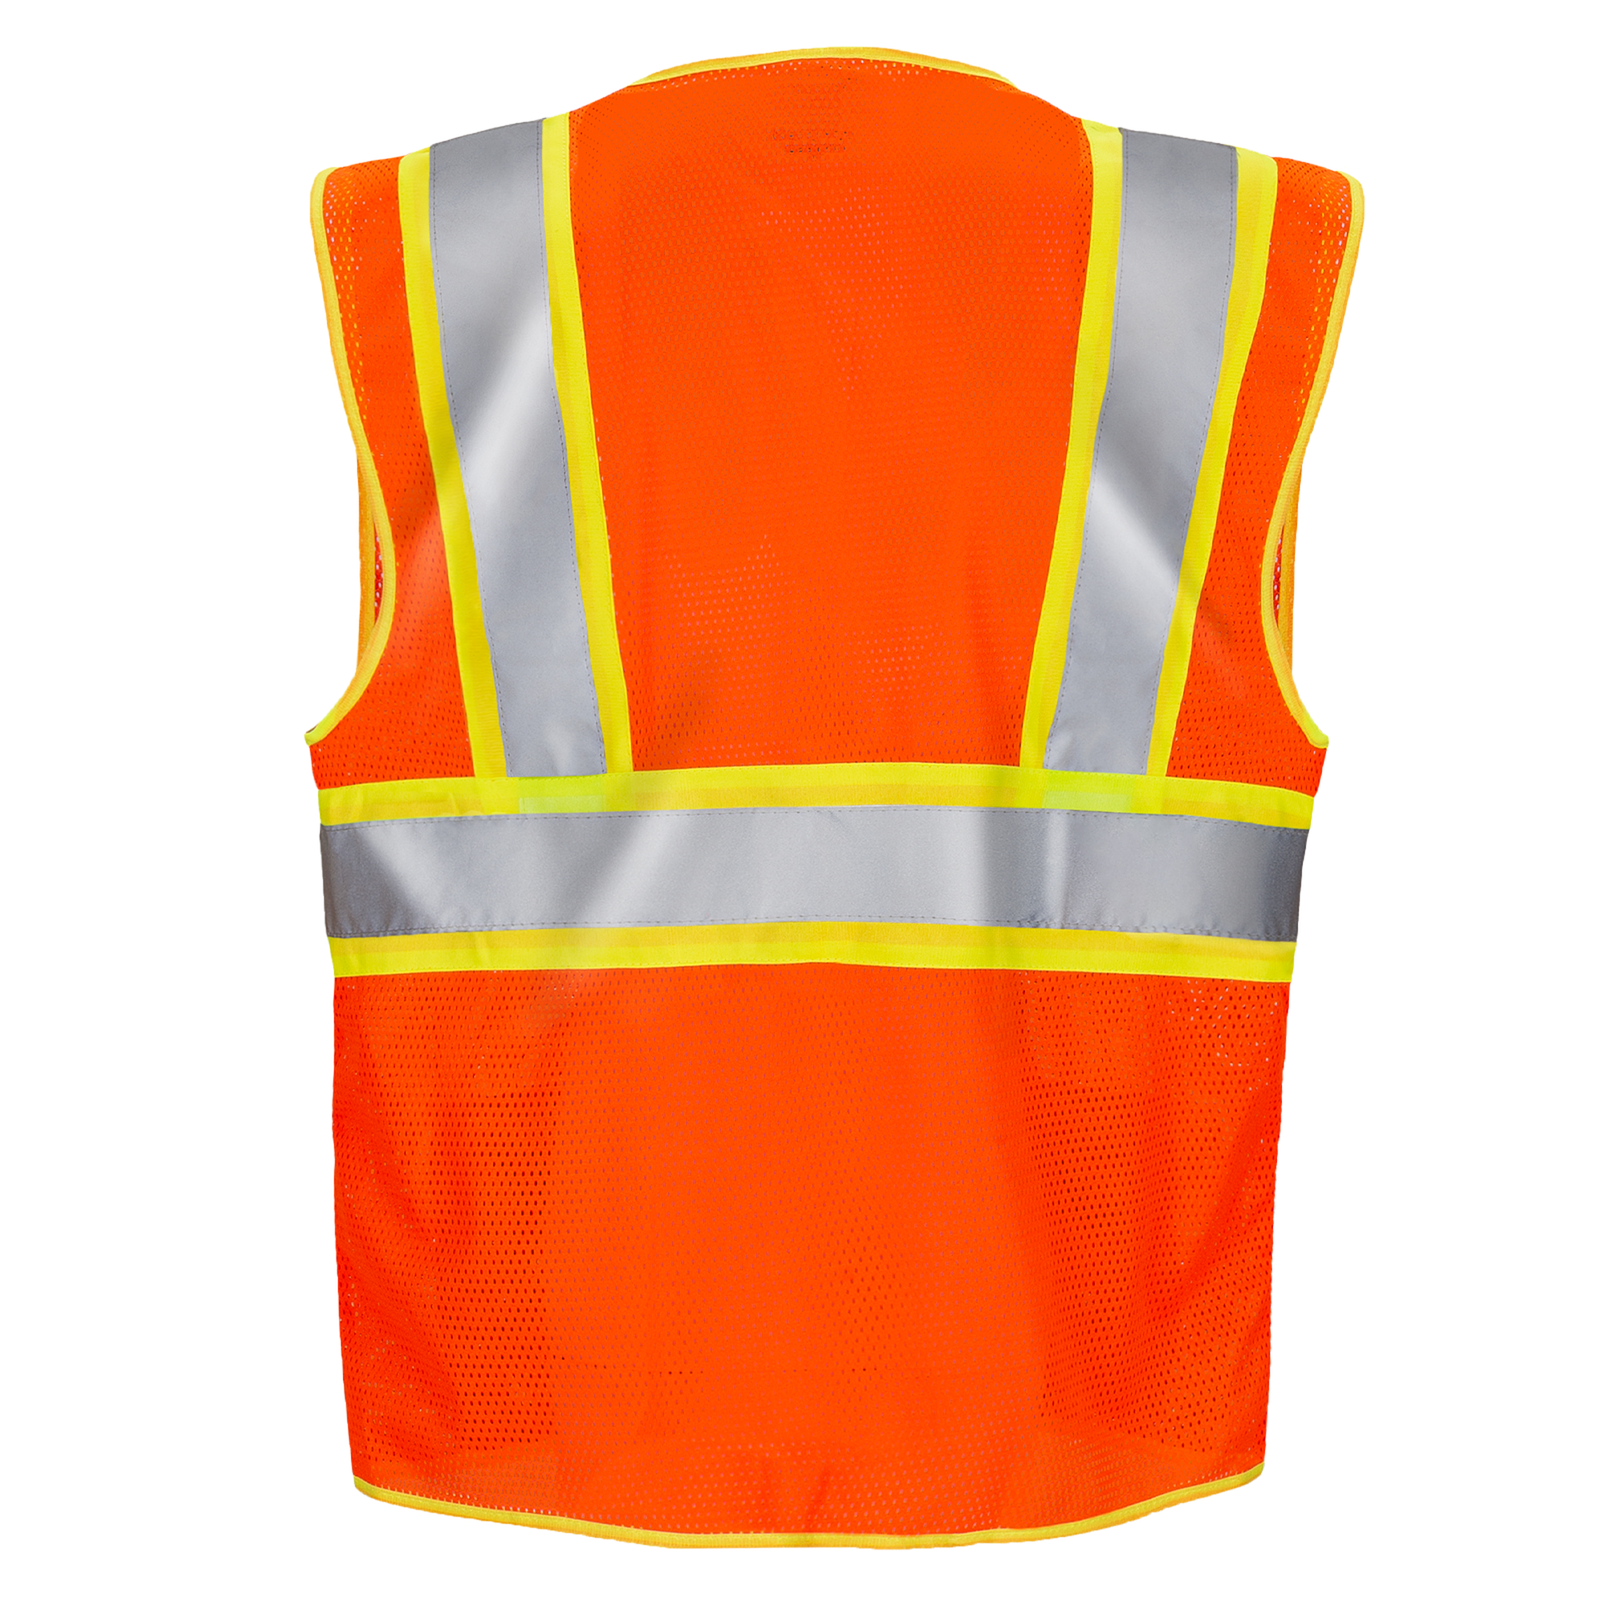 Back view of the hi vis two toned Orange mesh safety vest with 2 inches reflective strip and pockets